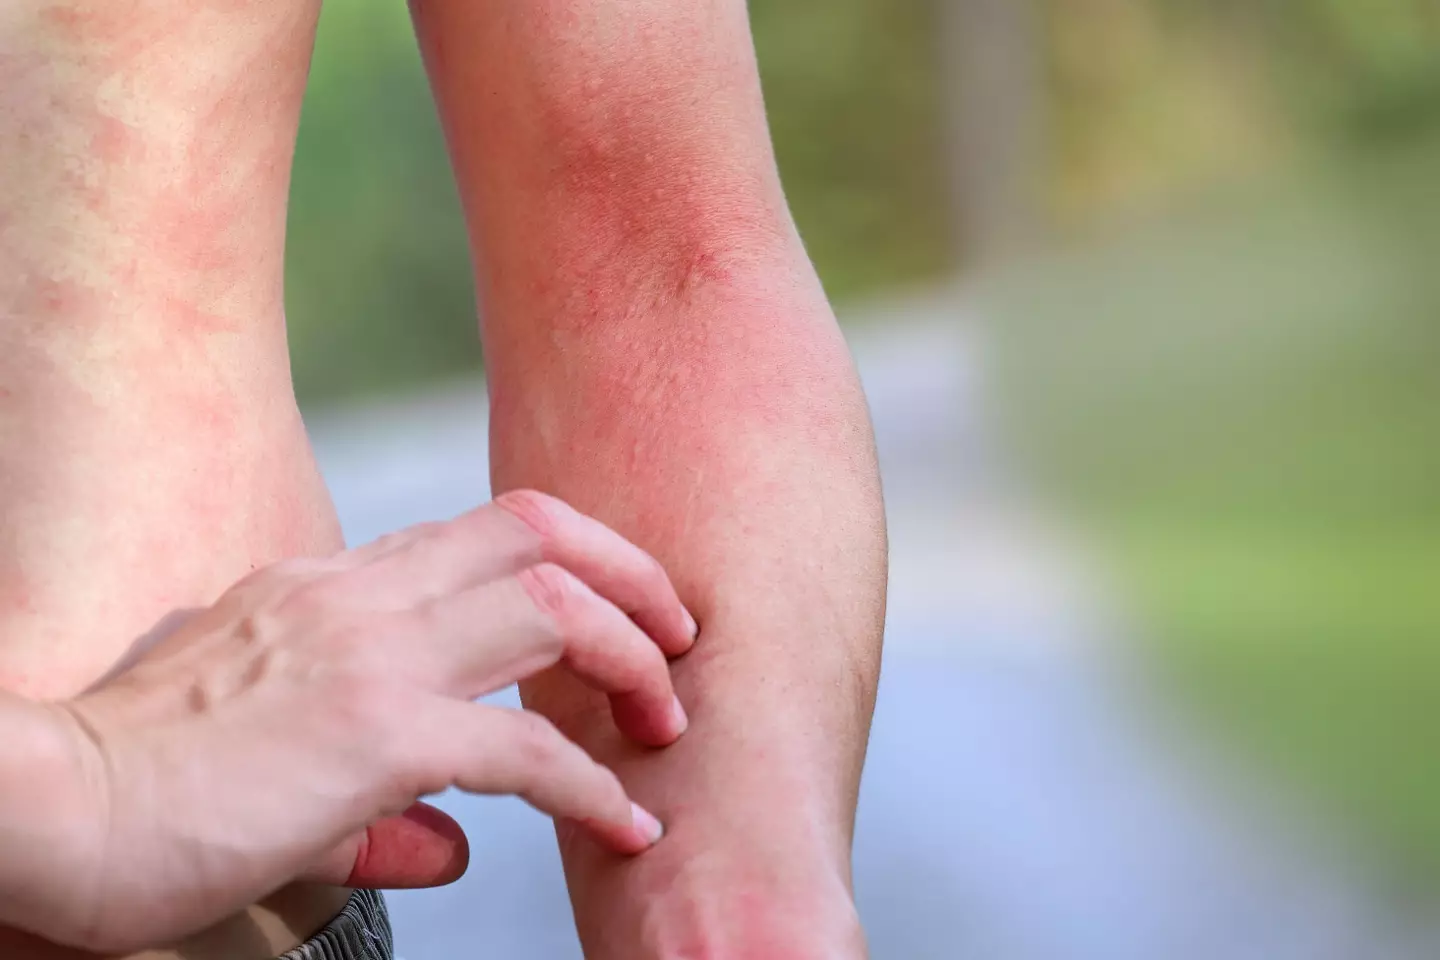 Eczema can cause itchy and flaky skin.